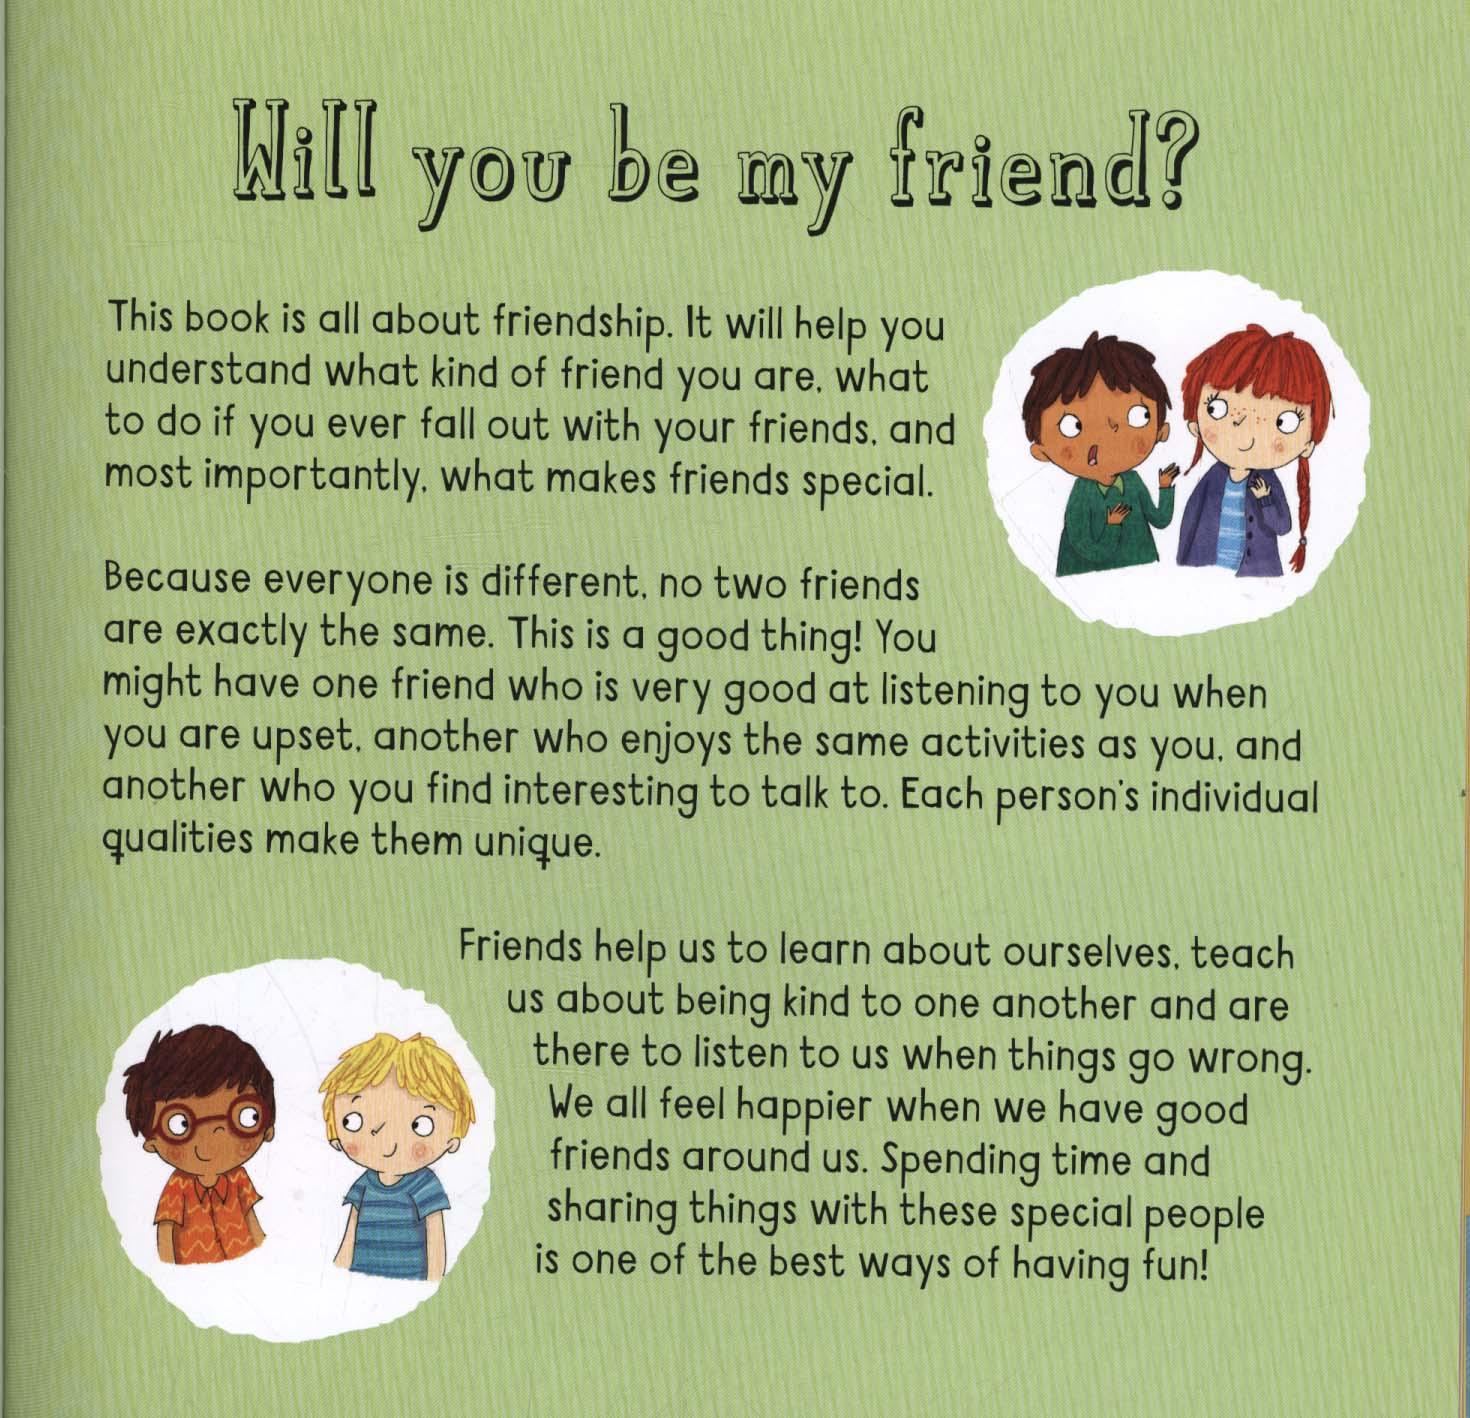 Will You be My Friend?